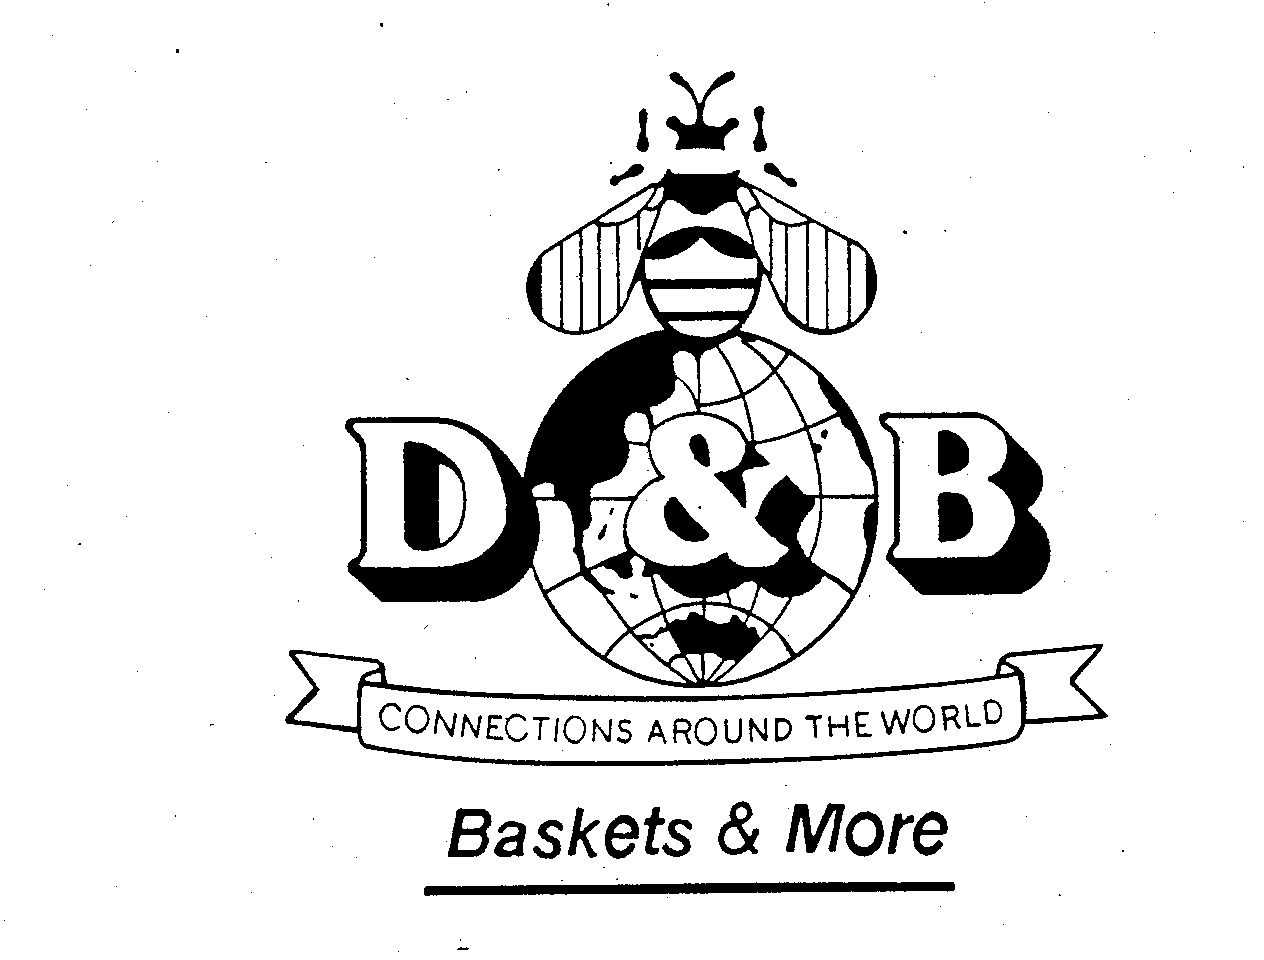  D &amp; B CONNECTIONS AROUND THE WORLD BASKETS &amp; MORE